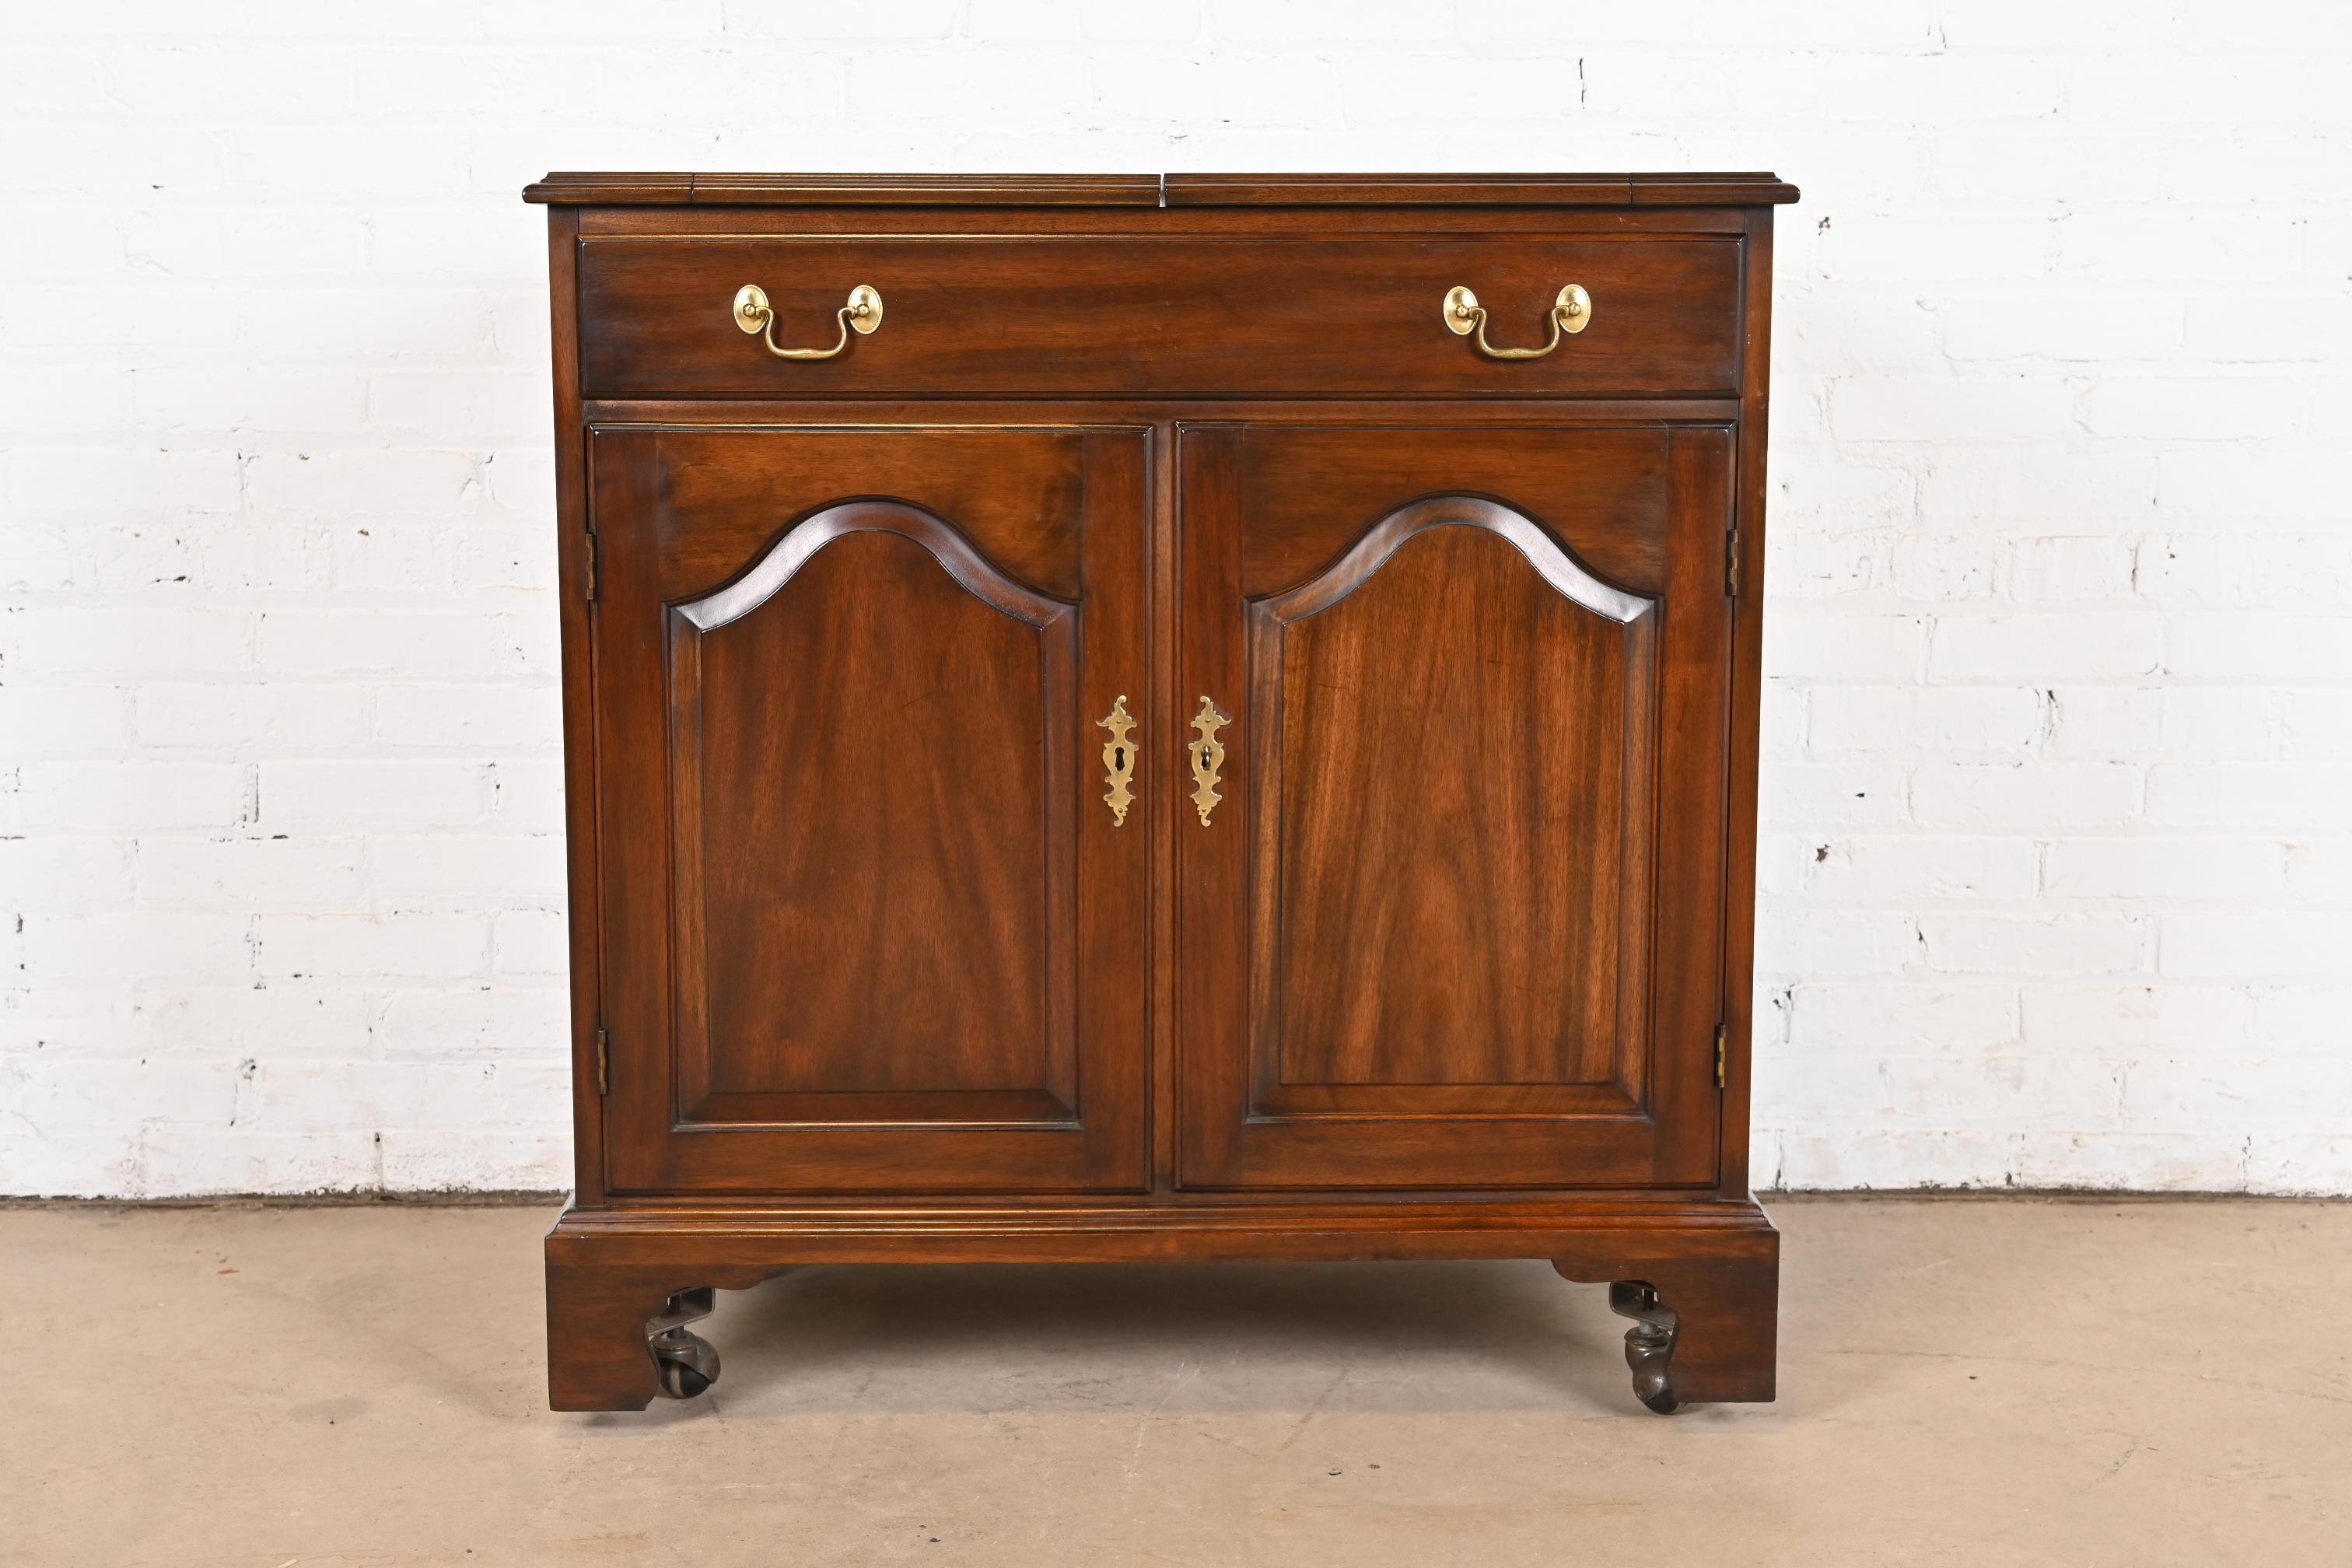 A gorgeous Georgian or Chippendale style flip-top rolling bar cabinet

By Henkel Harris

USA, 1973

Solid mahogany, with original brass hardware. Cabinet locks, and key is included.

Measures: 34.25